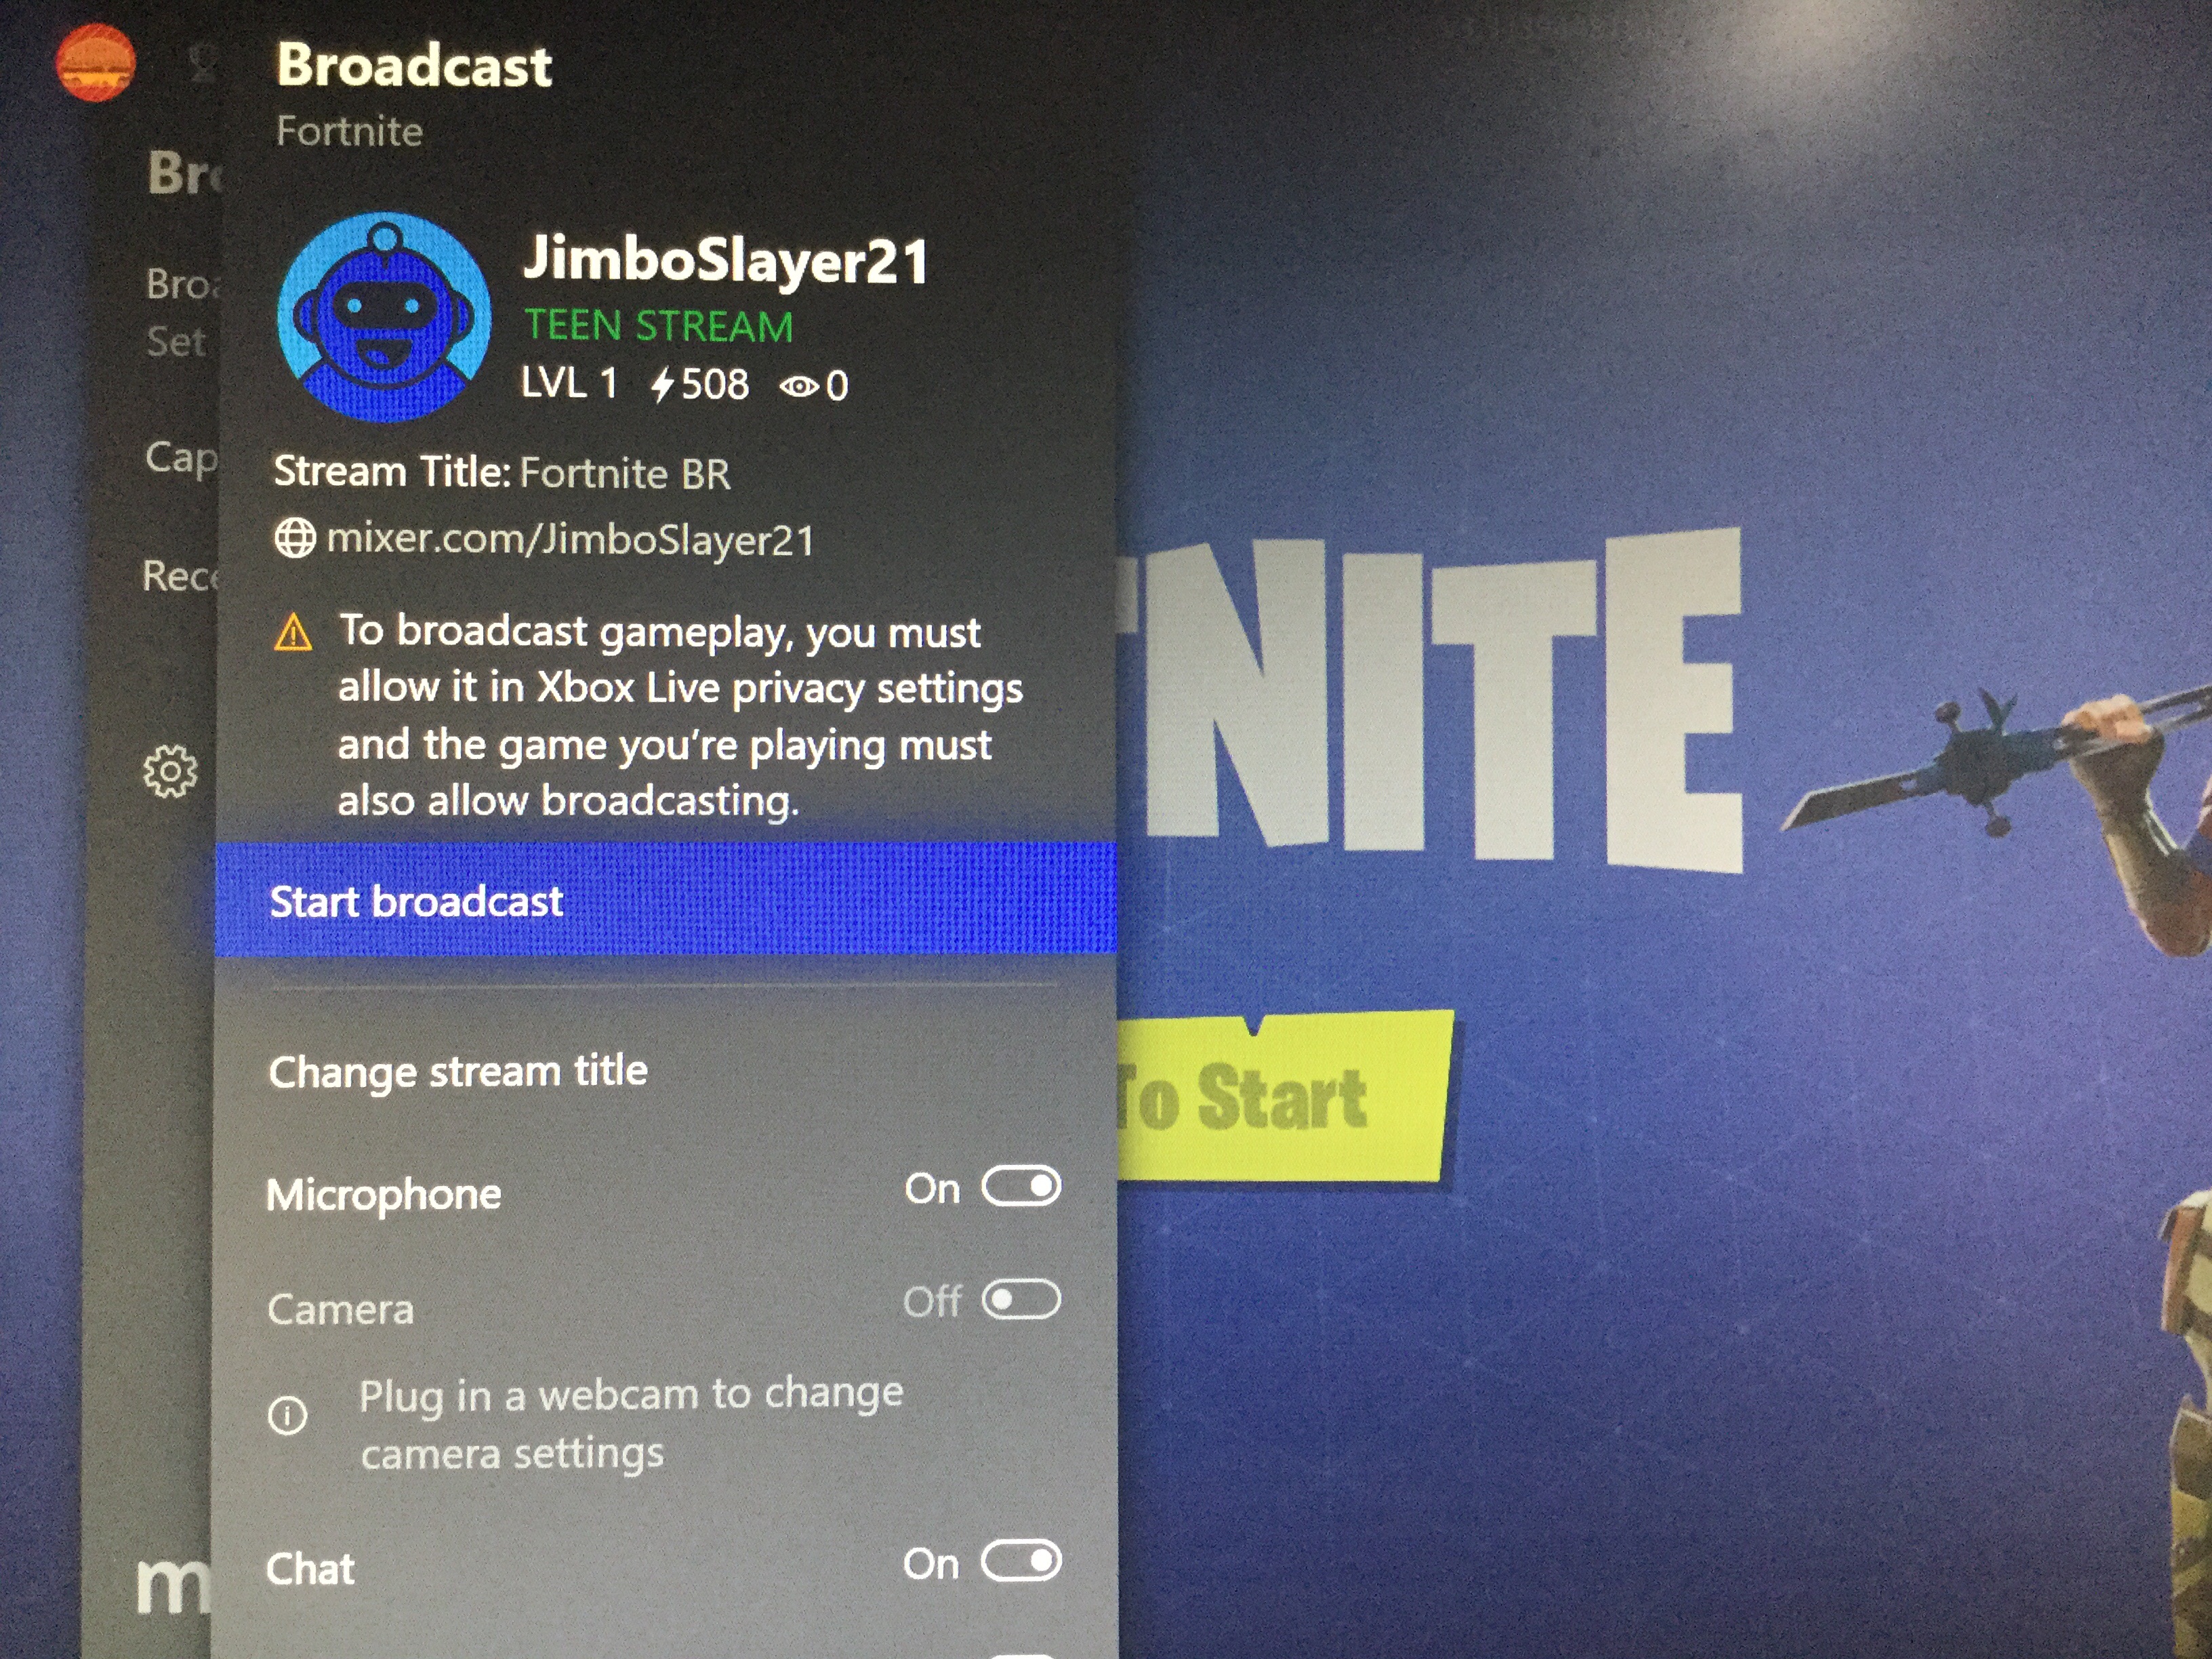 How Can I Fix My Xbox Live Privacy Settings So I Can Broadcast Microsoft Community - roblox music code take me to your xbox to play fortnite today